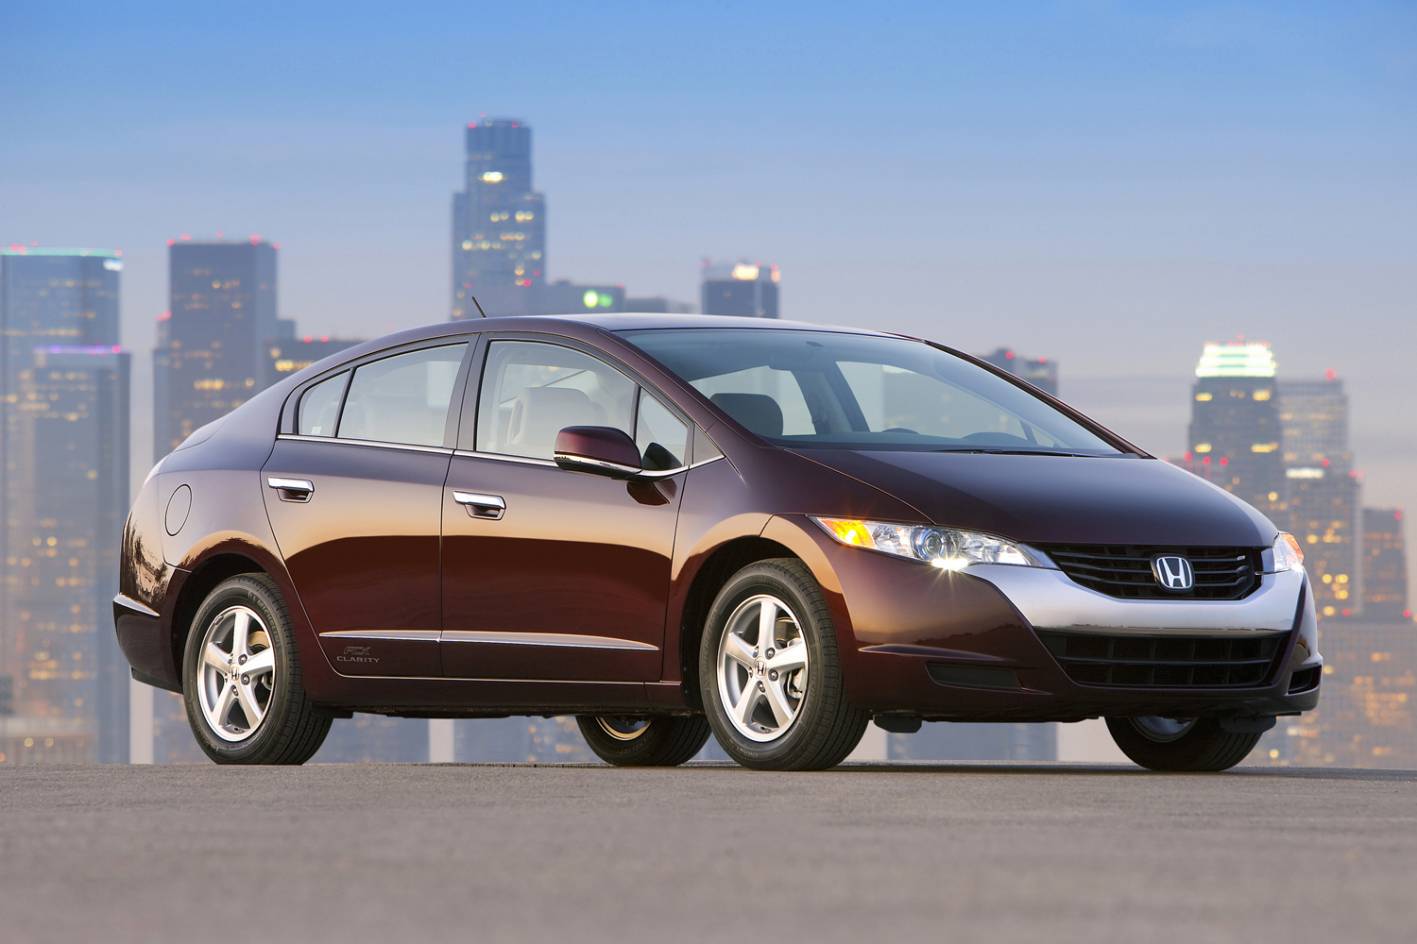 GM and Honda to co-develop hydrogen fuel cell technologies